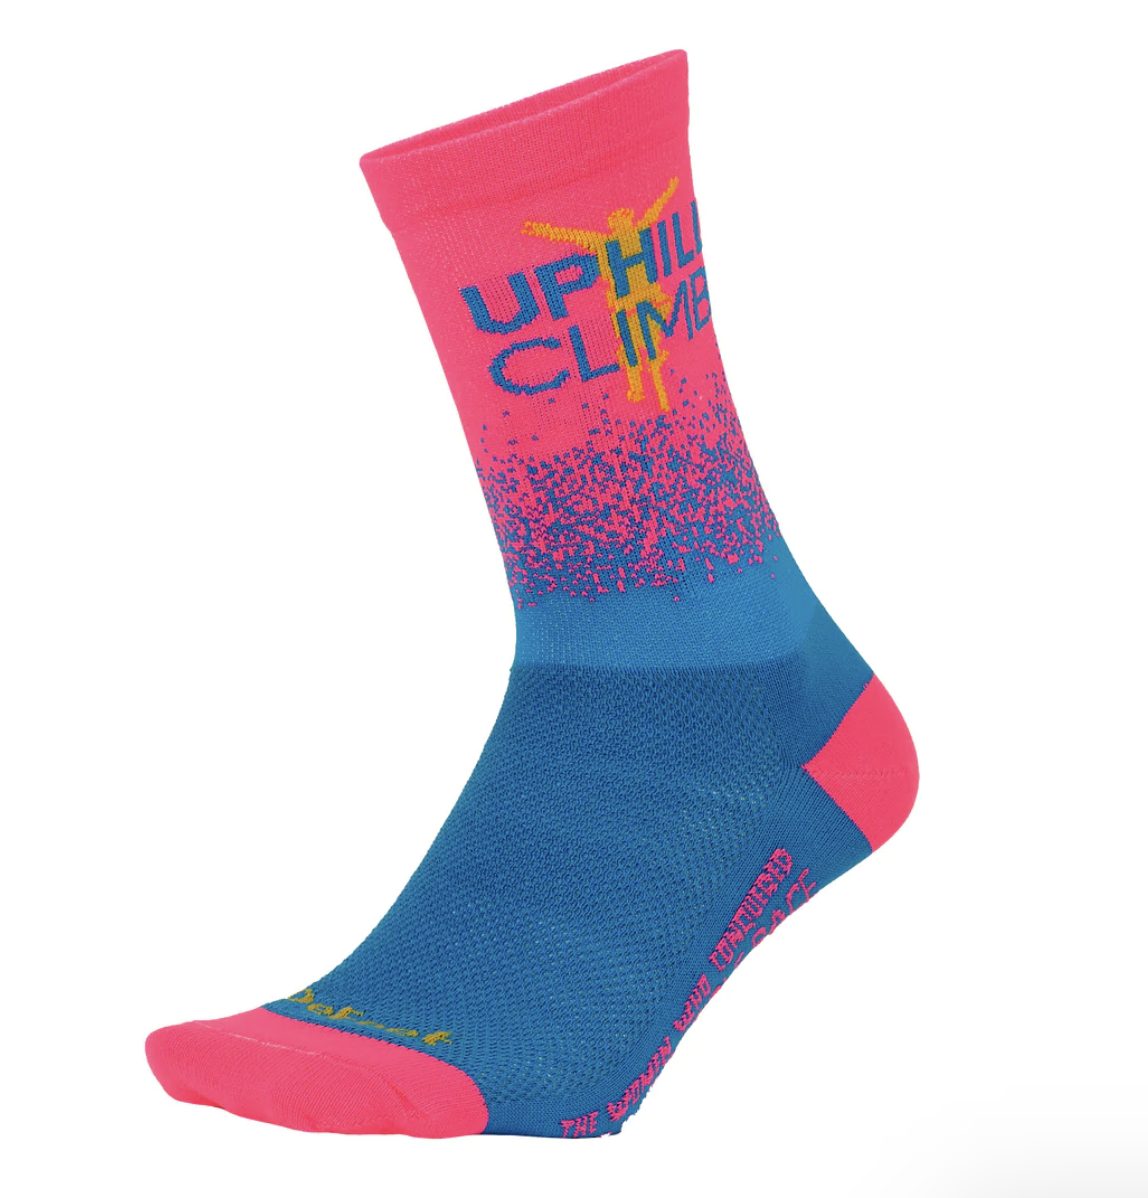 DeFeet Supports Uphill Climb Documentary with Limited Edition Sock